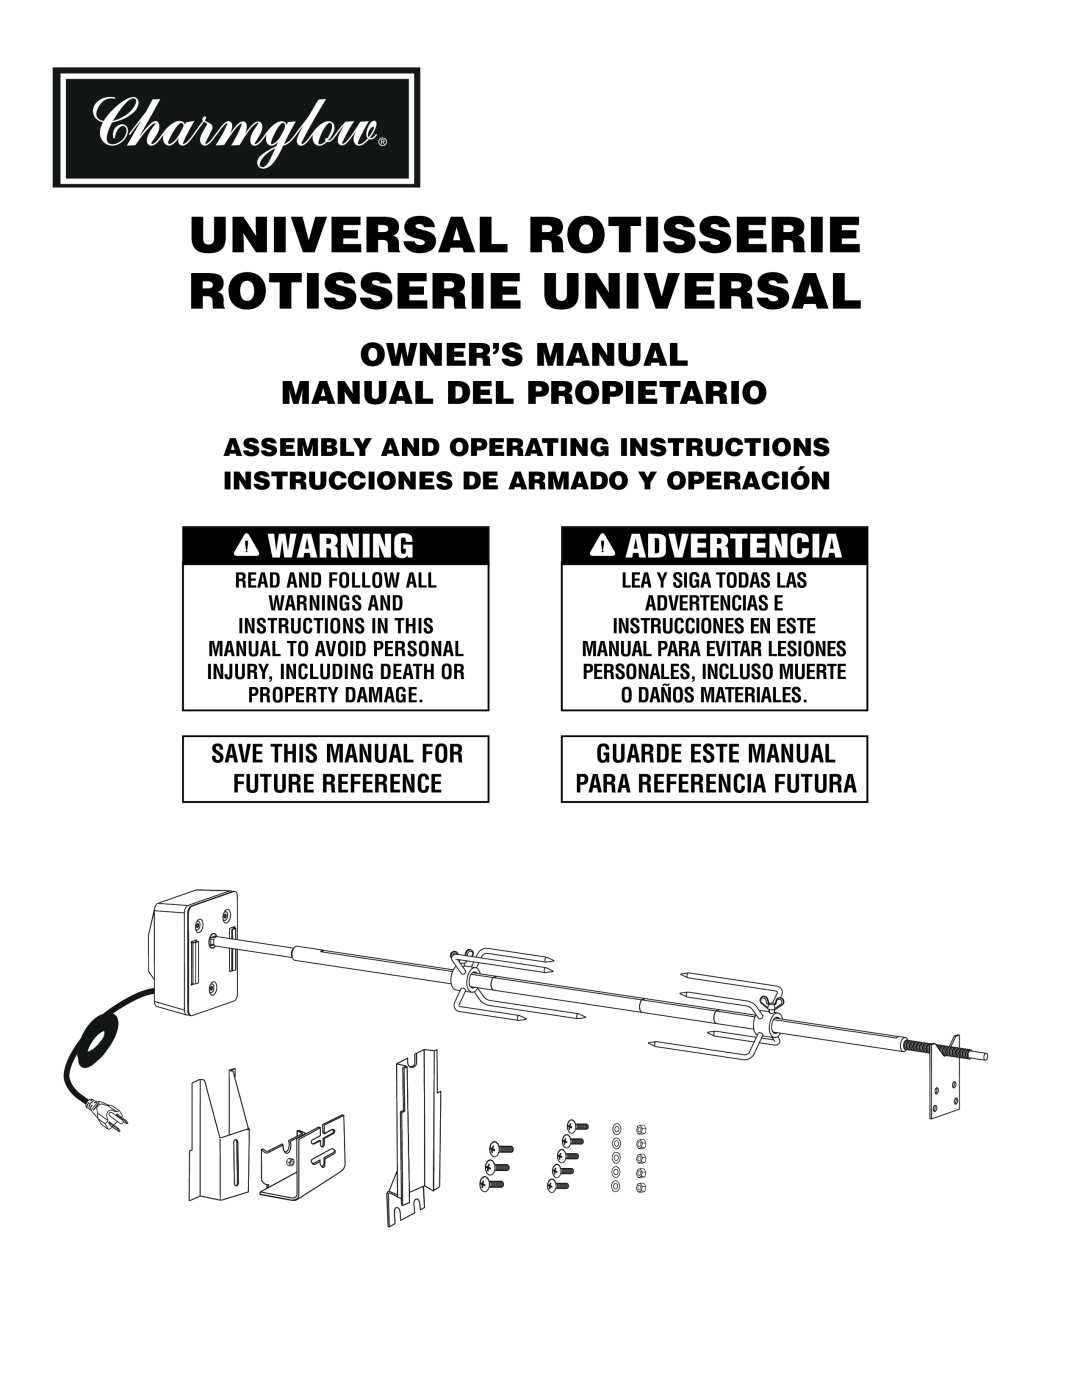 Brinkmann Universal Rotisserie manual Advertencia, Save This Manual For Future Reference 